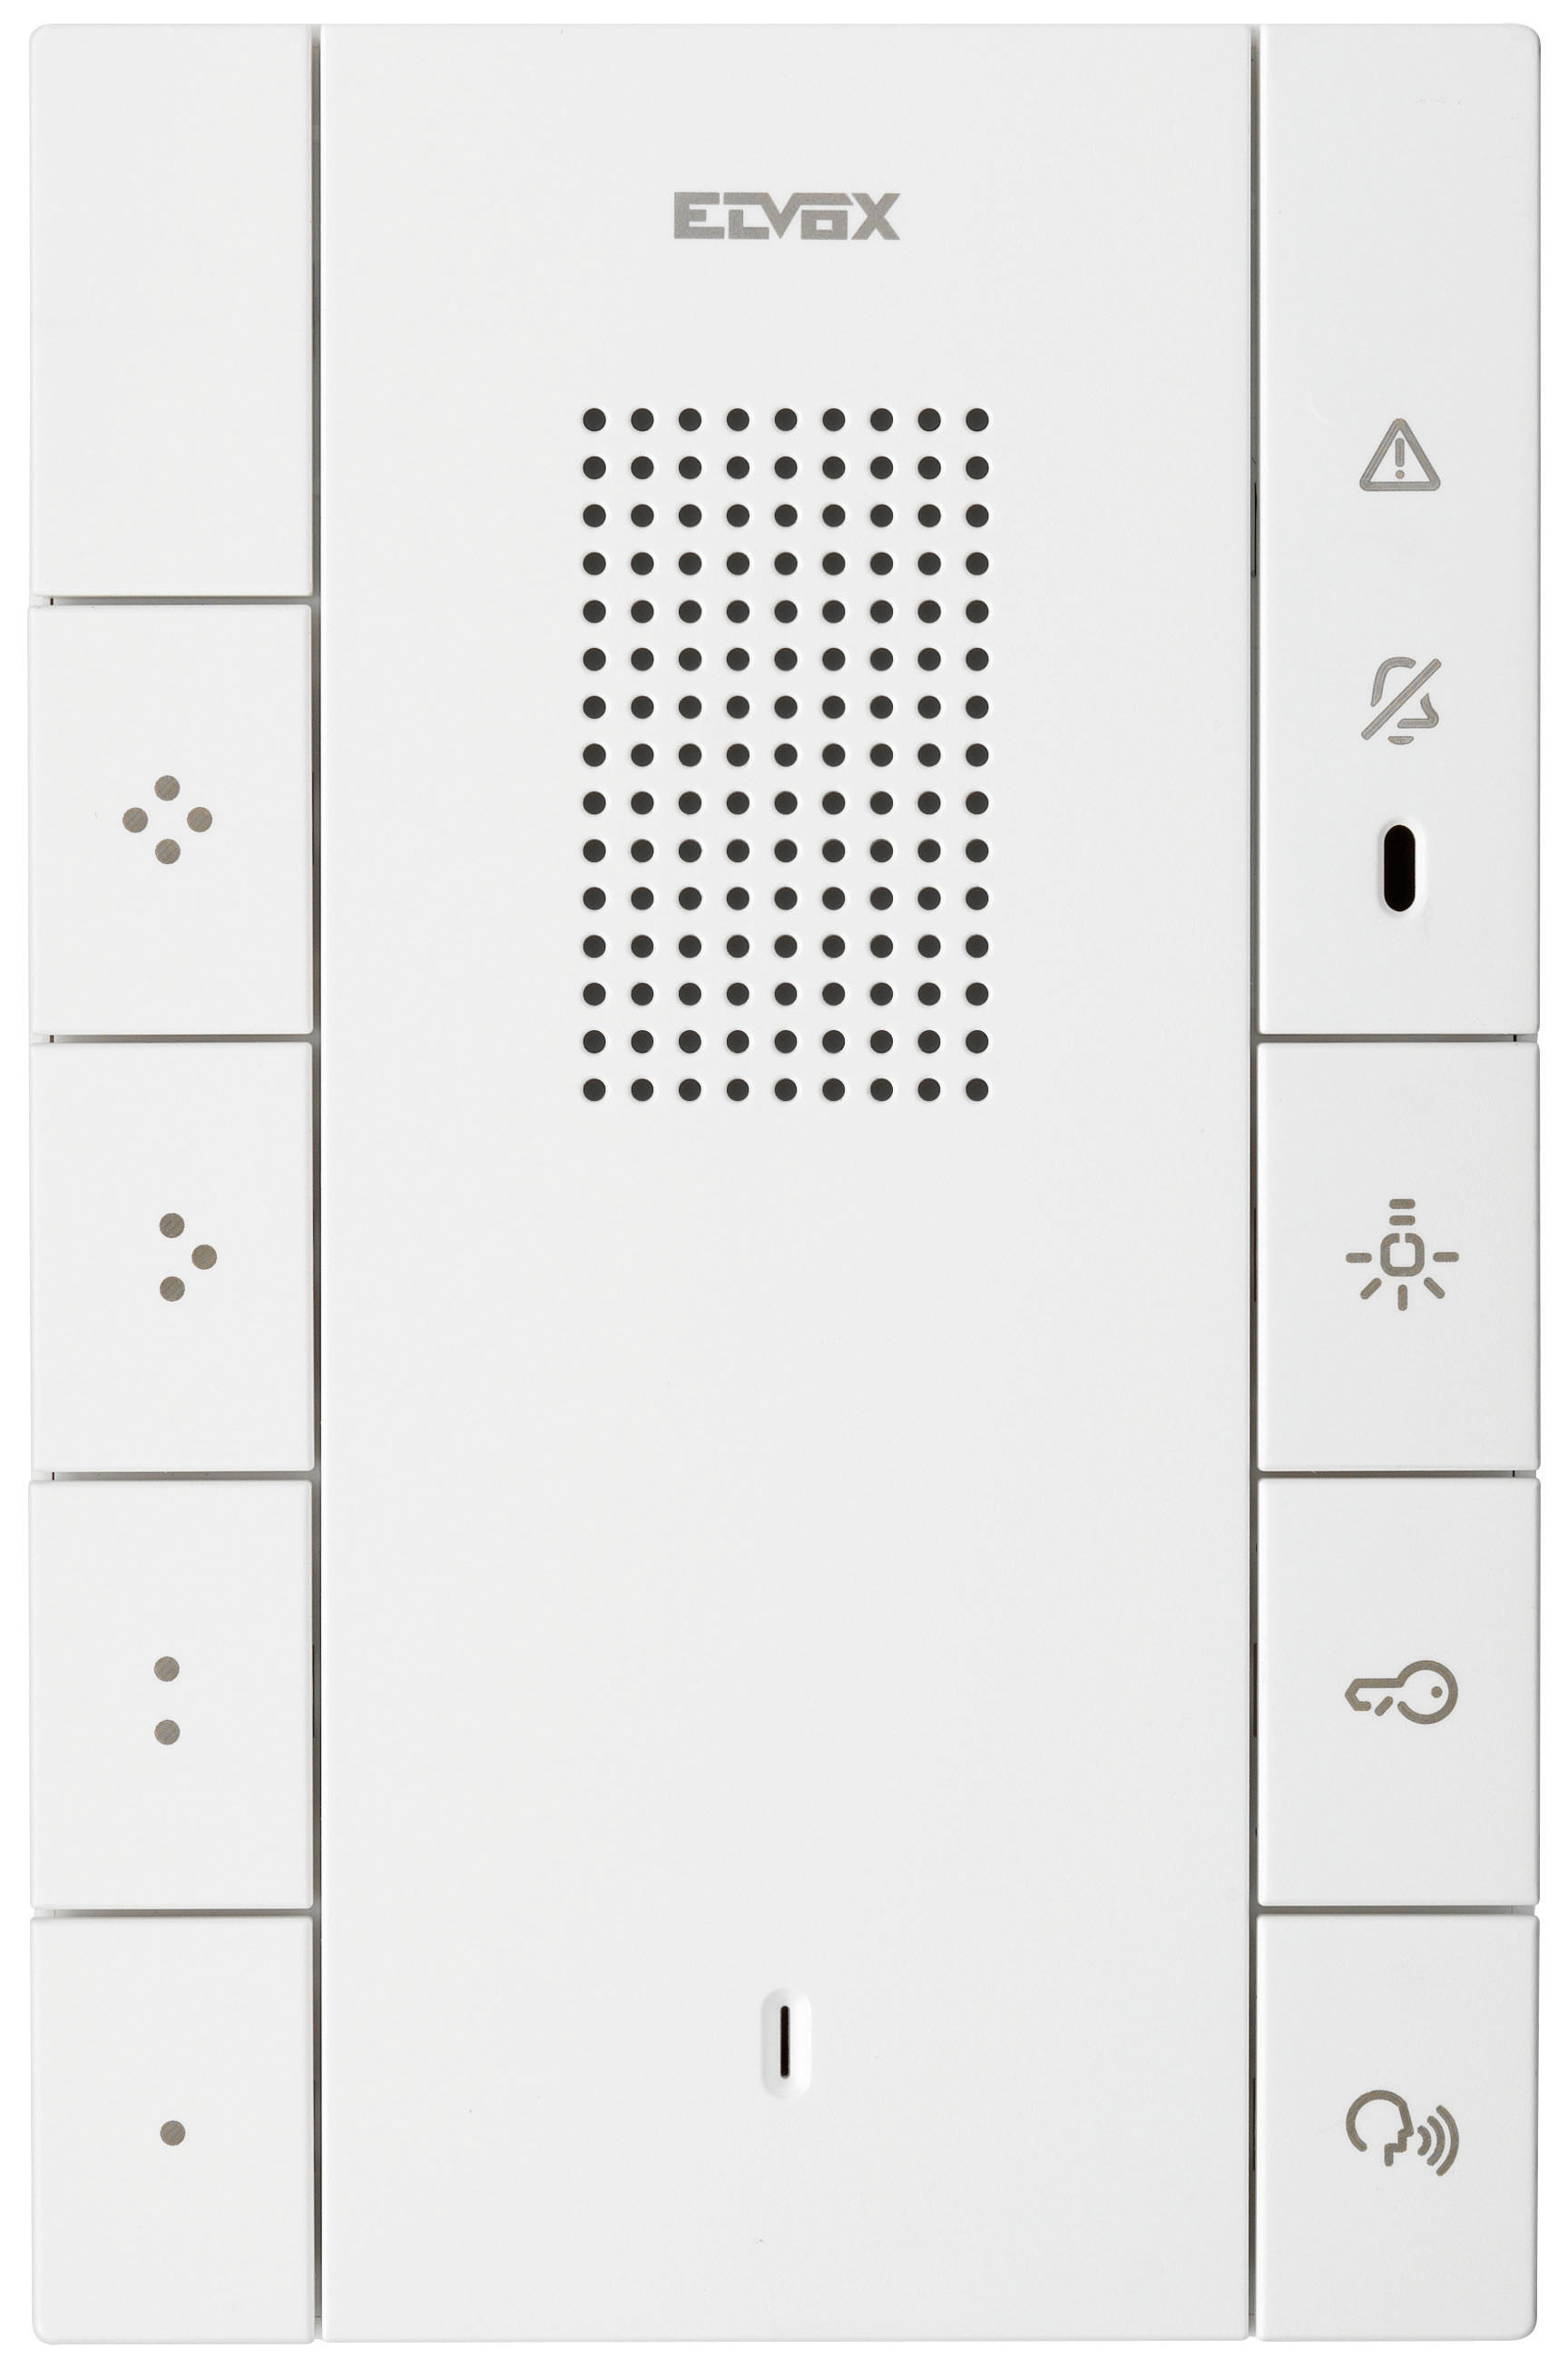 ELVOX VOXIE DUE FILI+ 2-WIRE INTERCOM HANDS-FREE AUDIO ONLY UNIT WHITE APARTMENT/RESIDENTIAL MECHANICAL BUTTON PLASTIC 12VDC